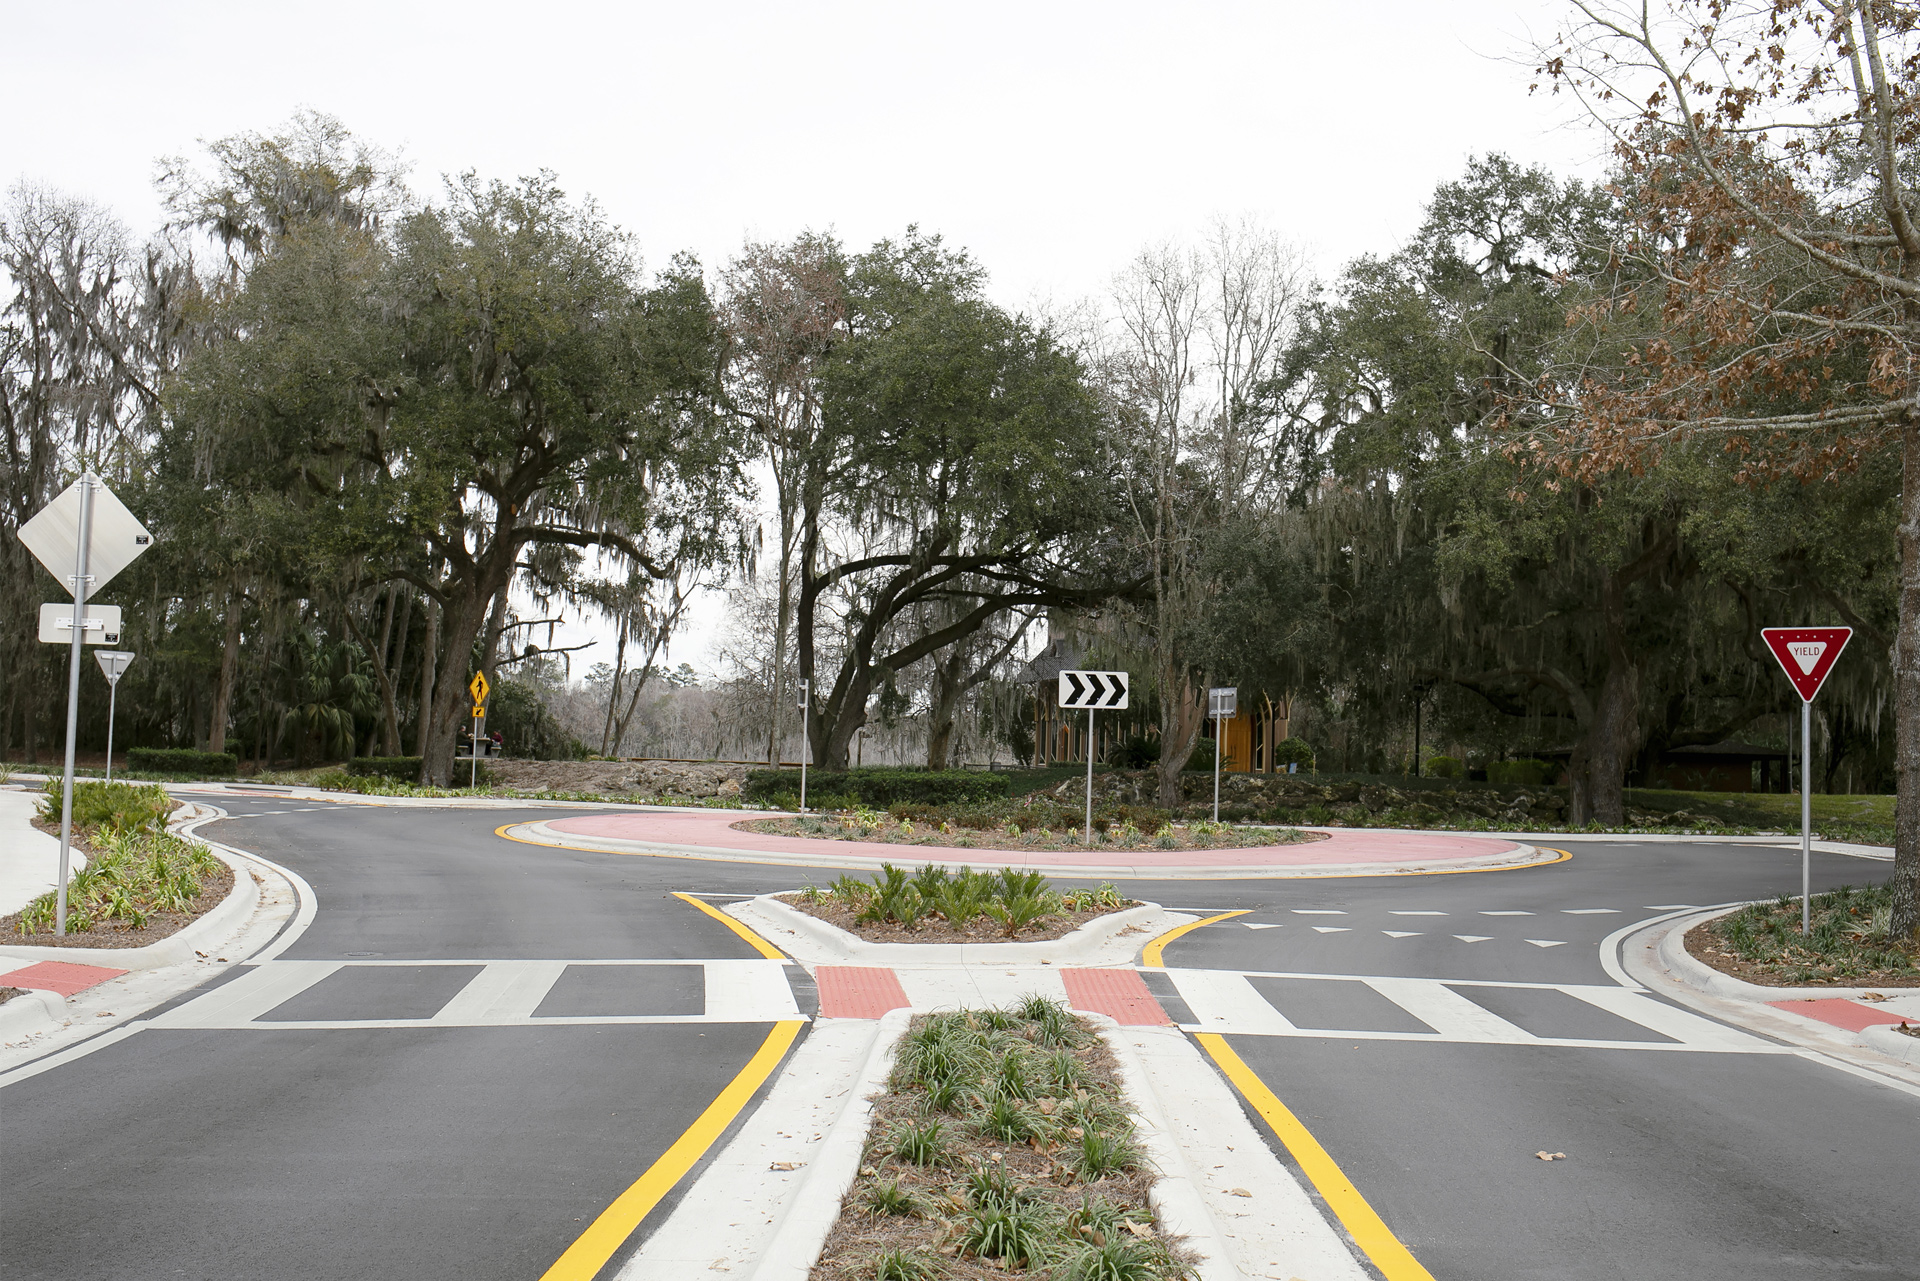 Roundabout at intersection of Radio Road and Museum Drive in Gainesville FL